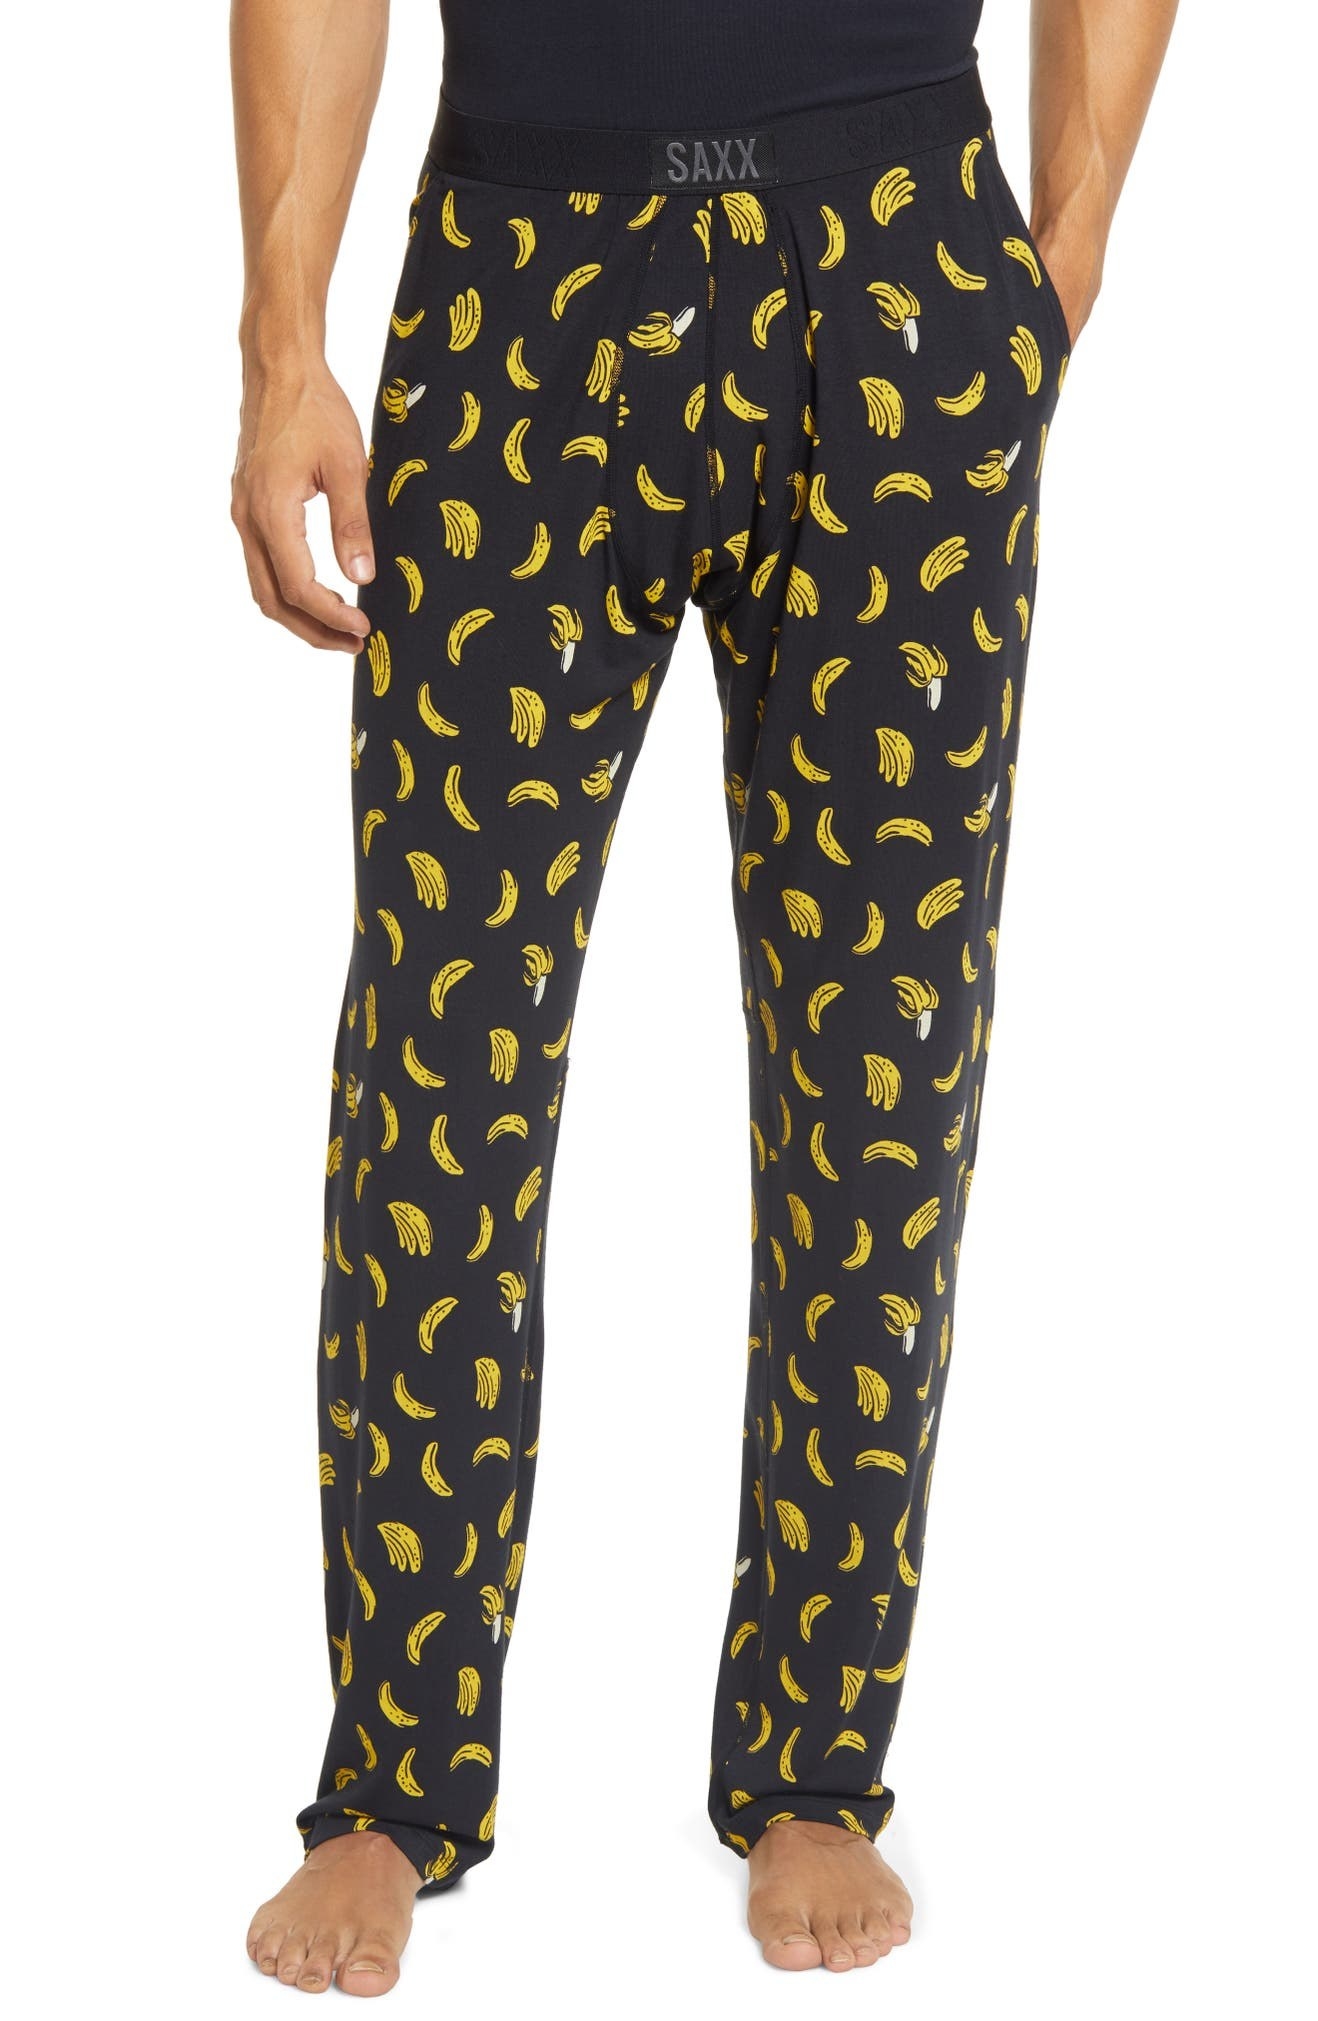 Model wearing the full-length pants in black with illustrations of bananas on them